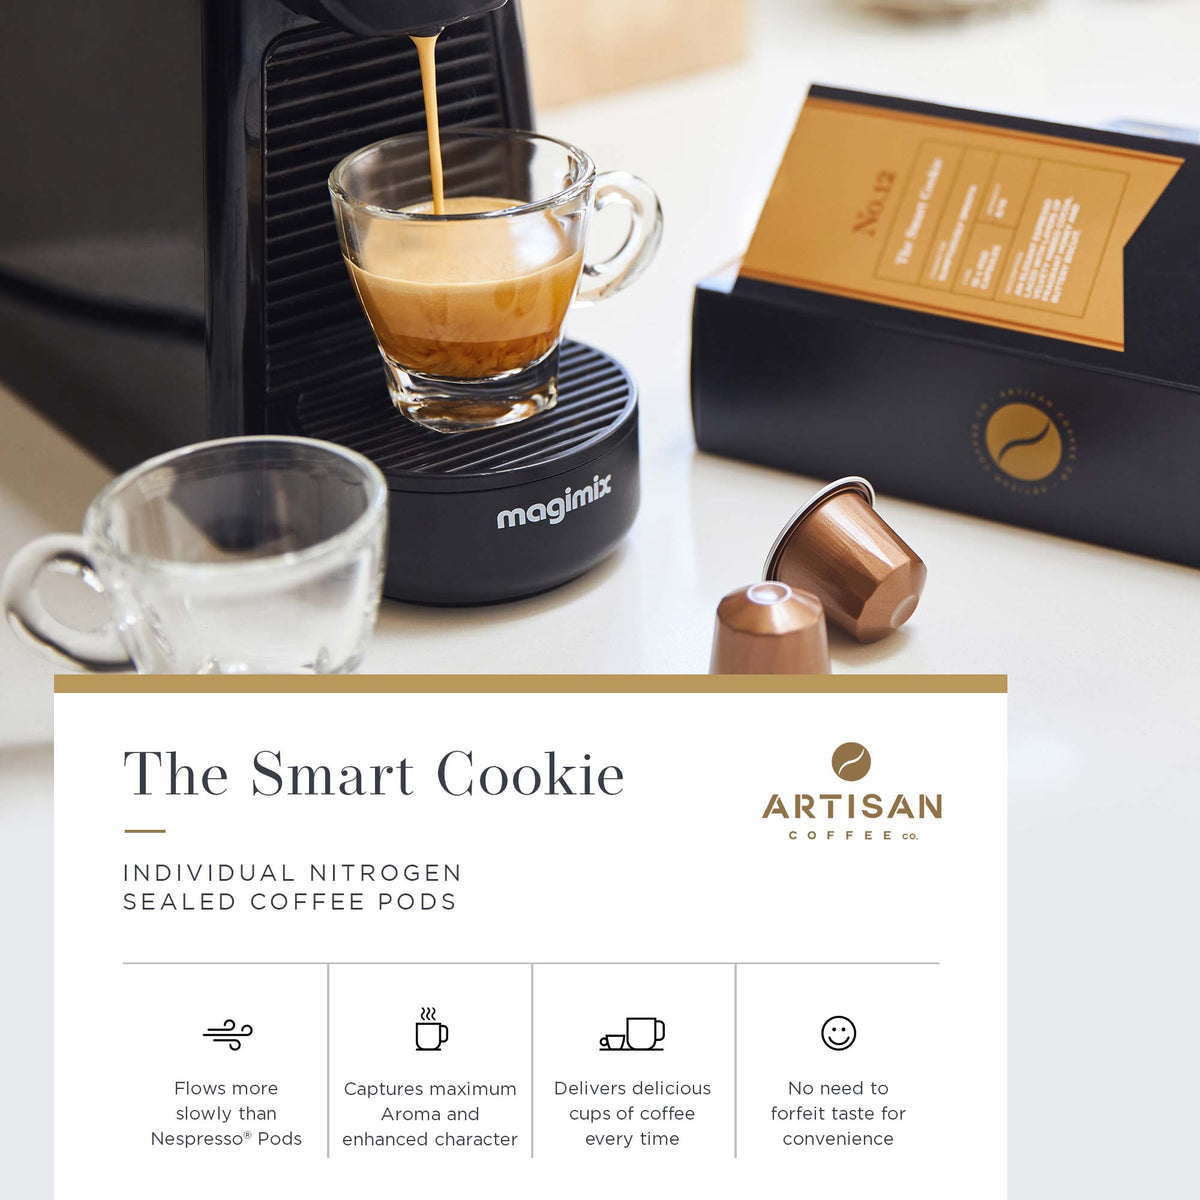 Artisan Coffee Co The Smart Cookie pods Infographic Nitrogen Sealed